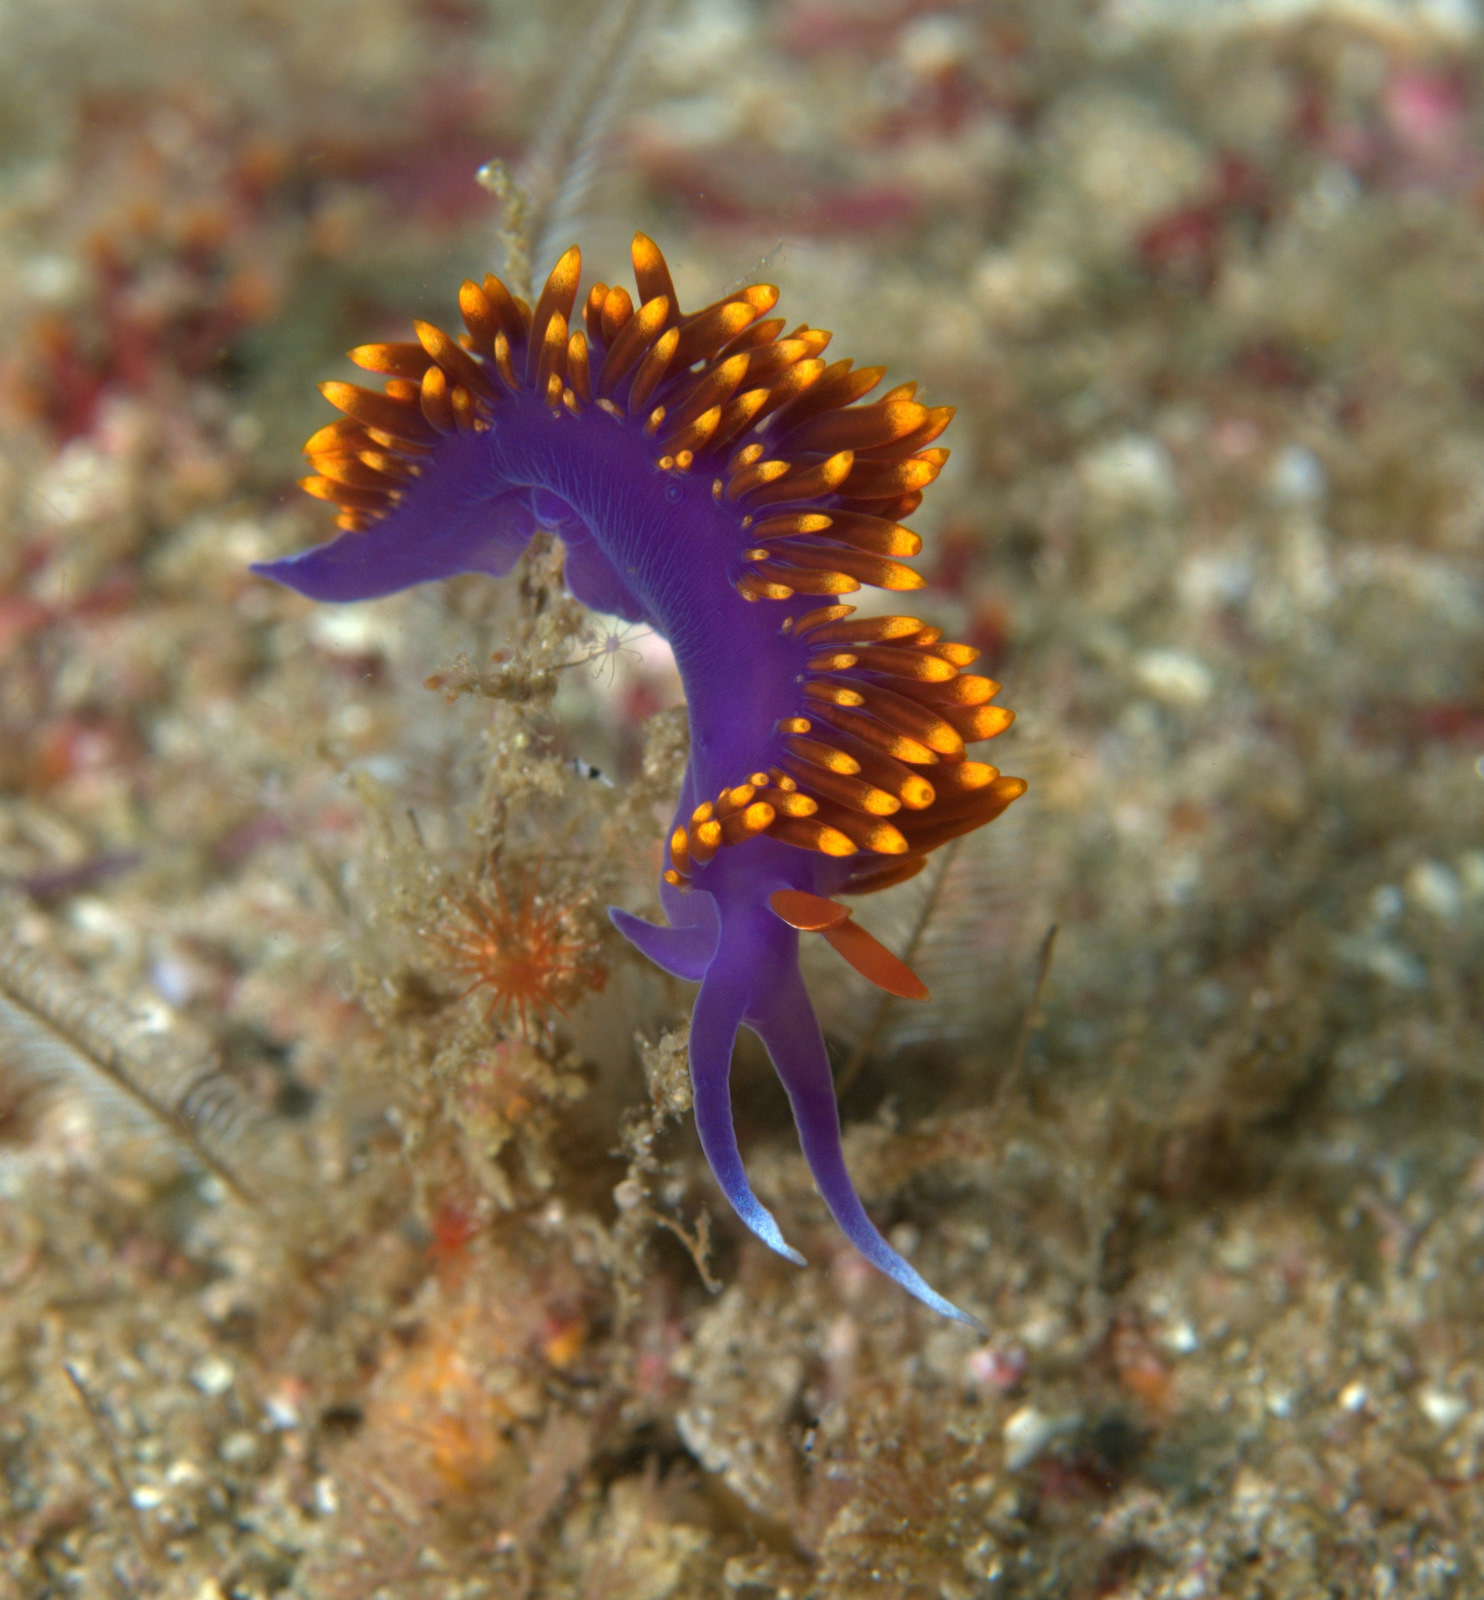 Image de Flabellina McMurtrie 1831